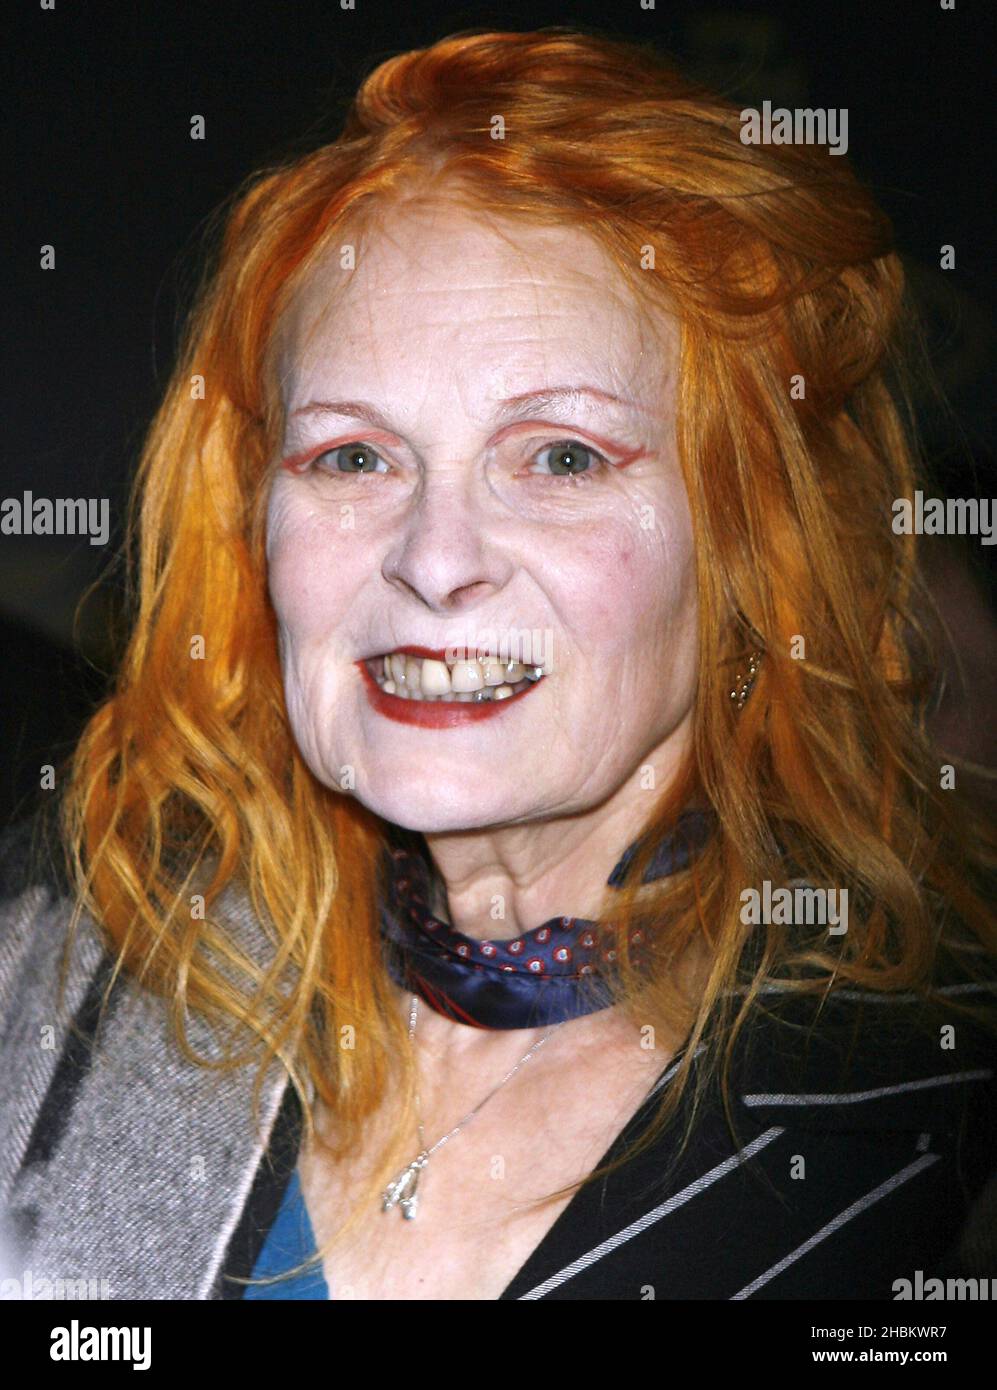 Vivienne Westwood all'Anglomania di Vivienne Westwood SS10 Catwalk Show a Selfridges in Oxford Street, Londra. Foto Stock